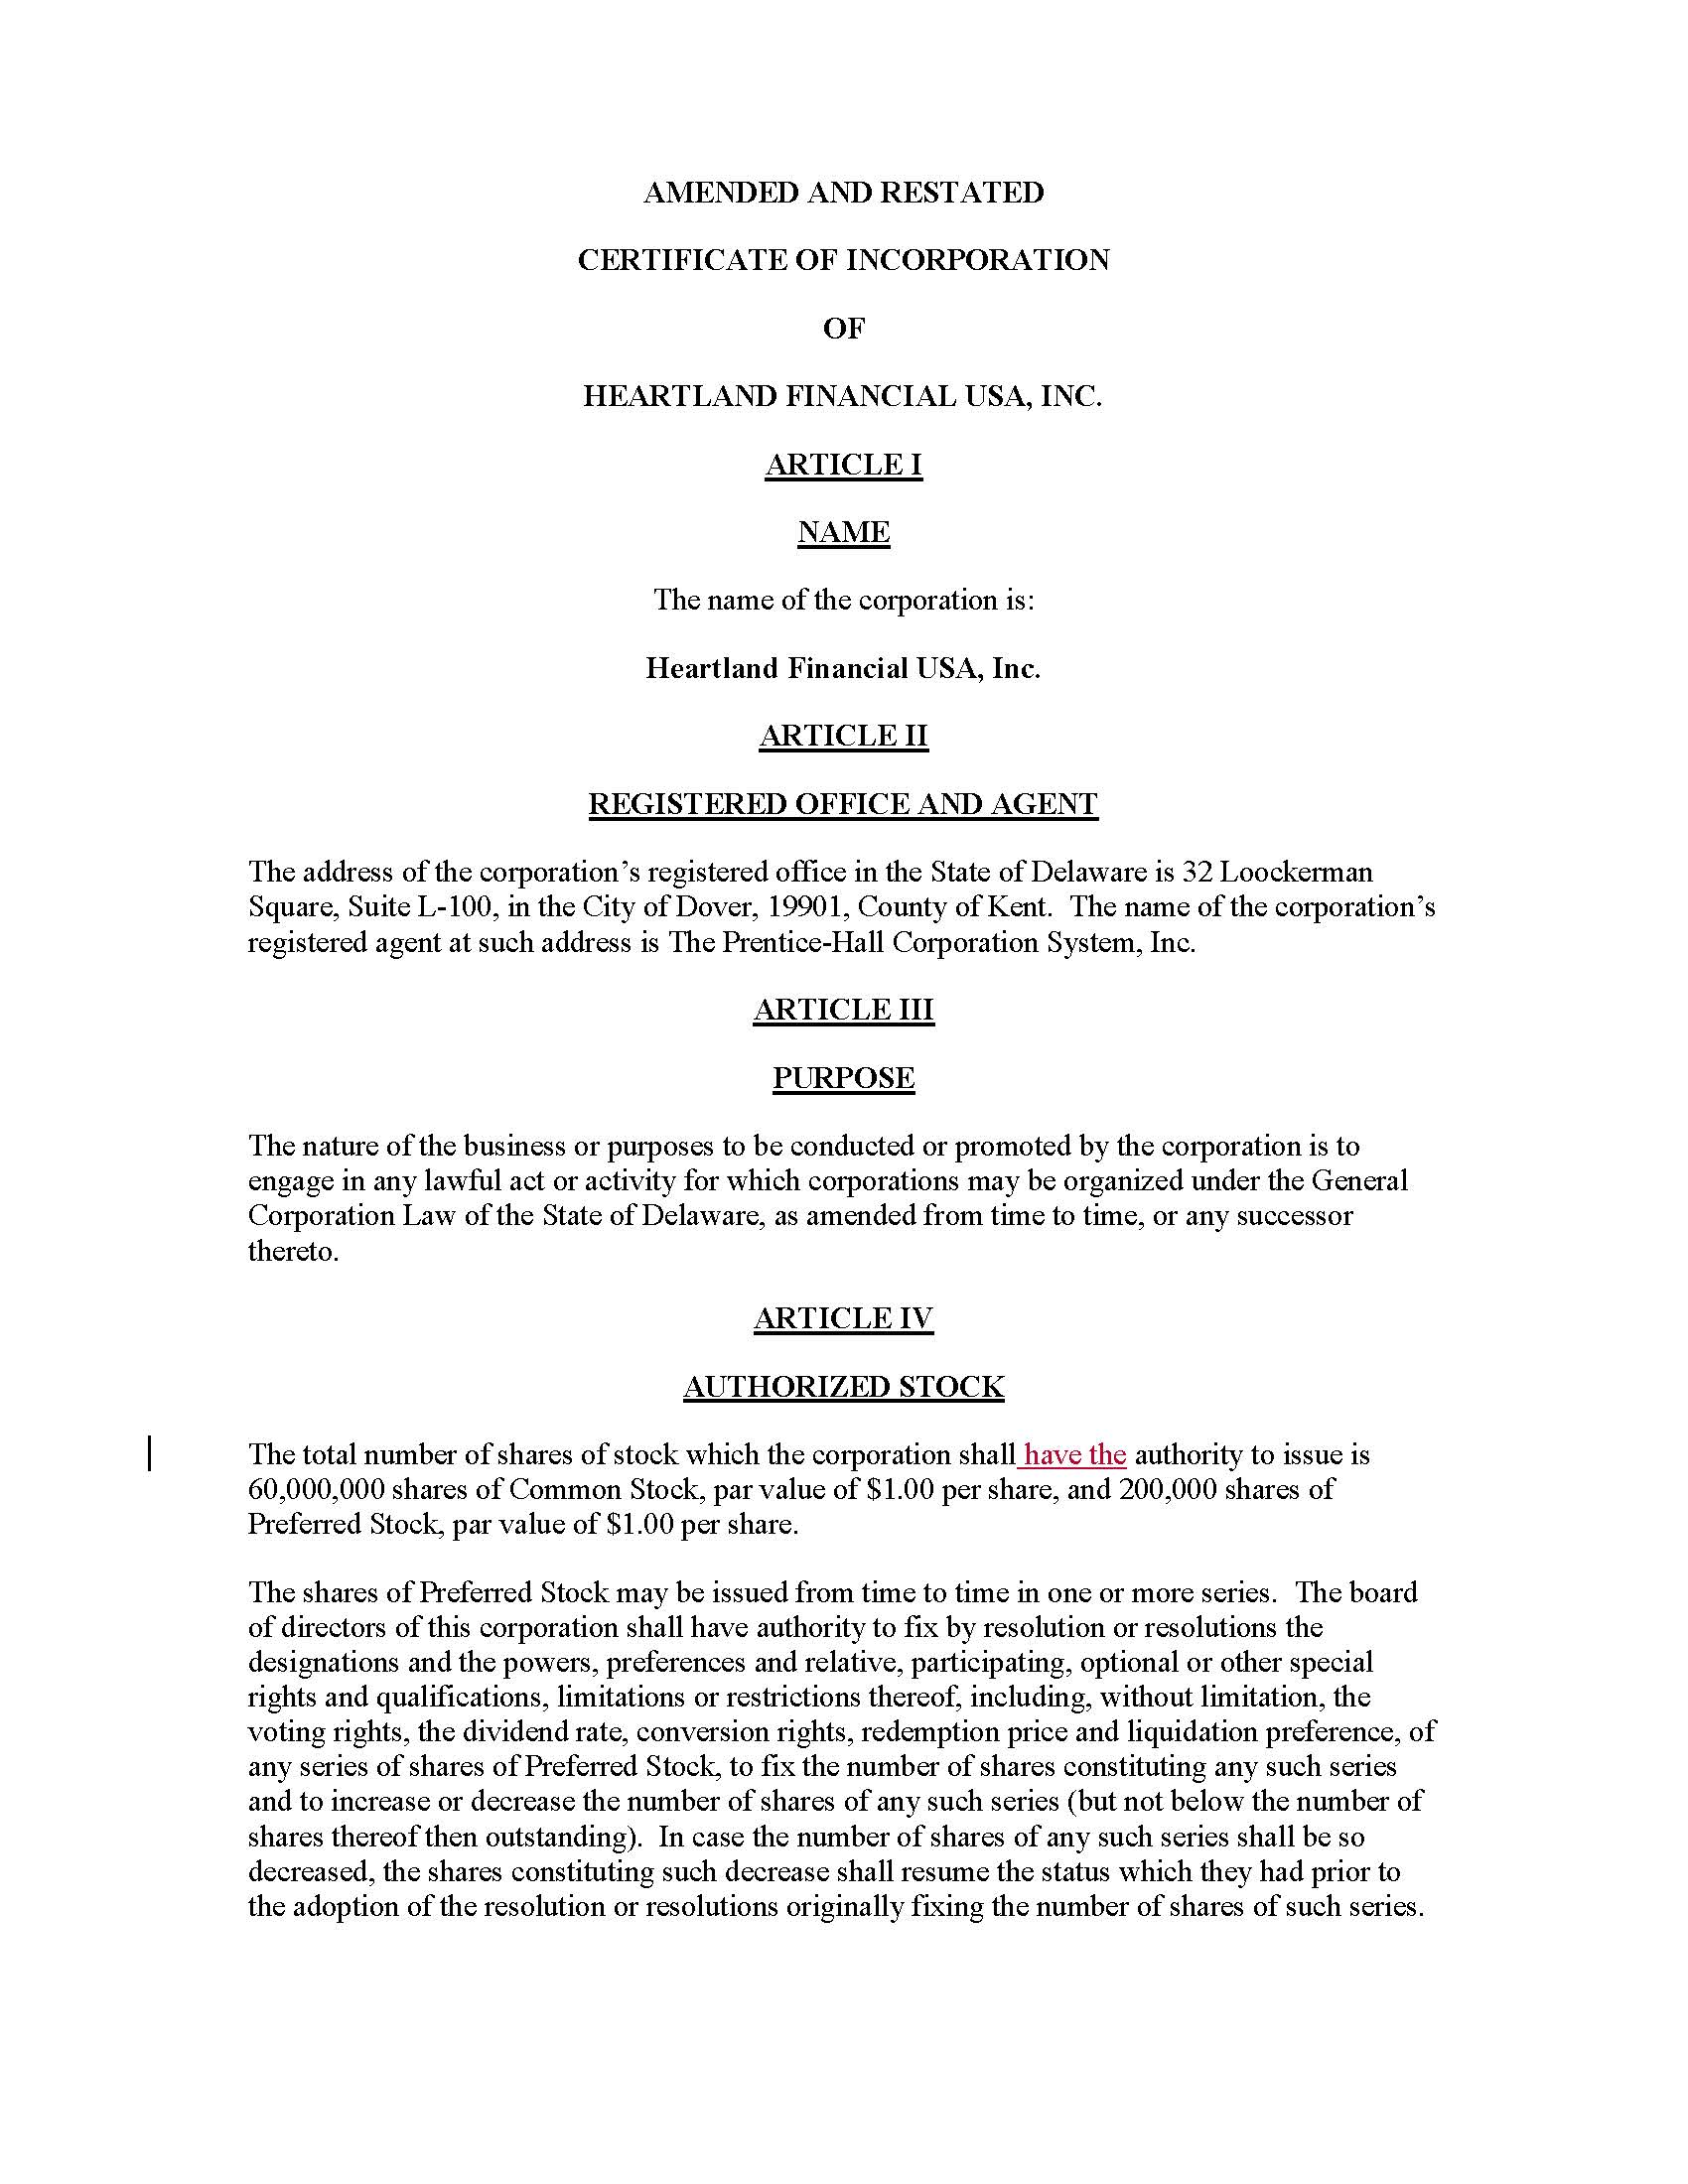 Amended and Restated Certificate of Incorporation (Redline) v.2_Page_1.jpg